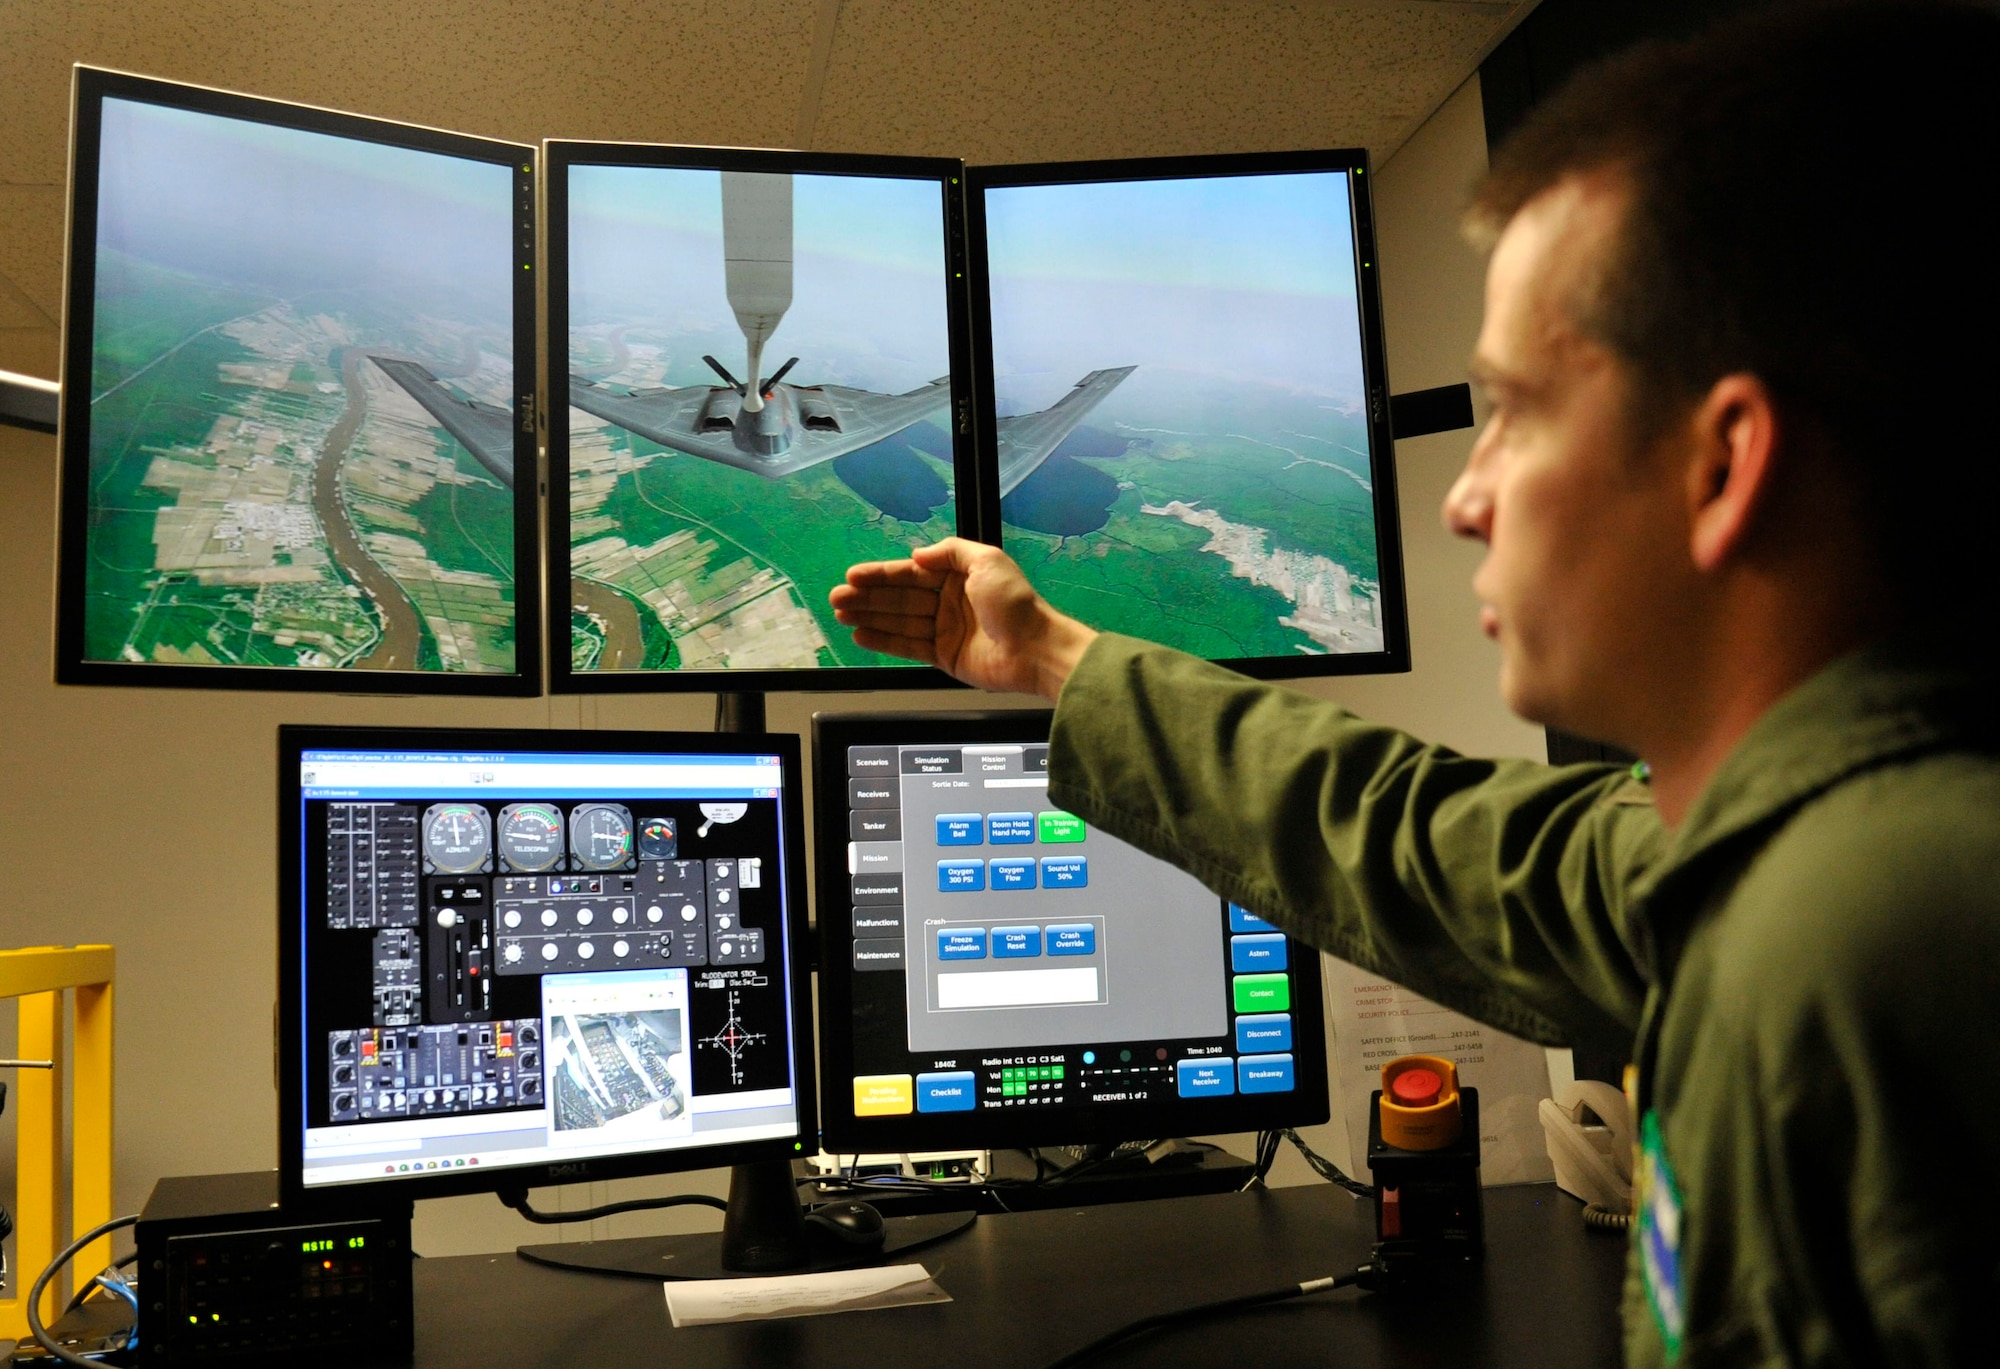 Staff Sgt. Michael Weidman, 92nd Operations Support Squadron instructor boom operator, shows the screens of the operating station for the Boom Operator Weapon System Trainer Feb. 17, 2015, at Fairchild Air Force Base, Wash. The operating station controls the type of aircraft for refueling as well as viewing the boom instruments during simulation practices. (U.S. Air Force photo/Airman 1st Class Nicolo J. Daniello)